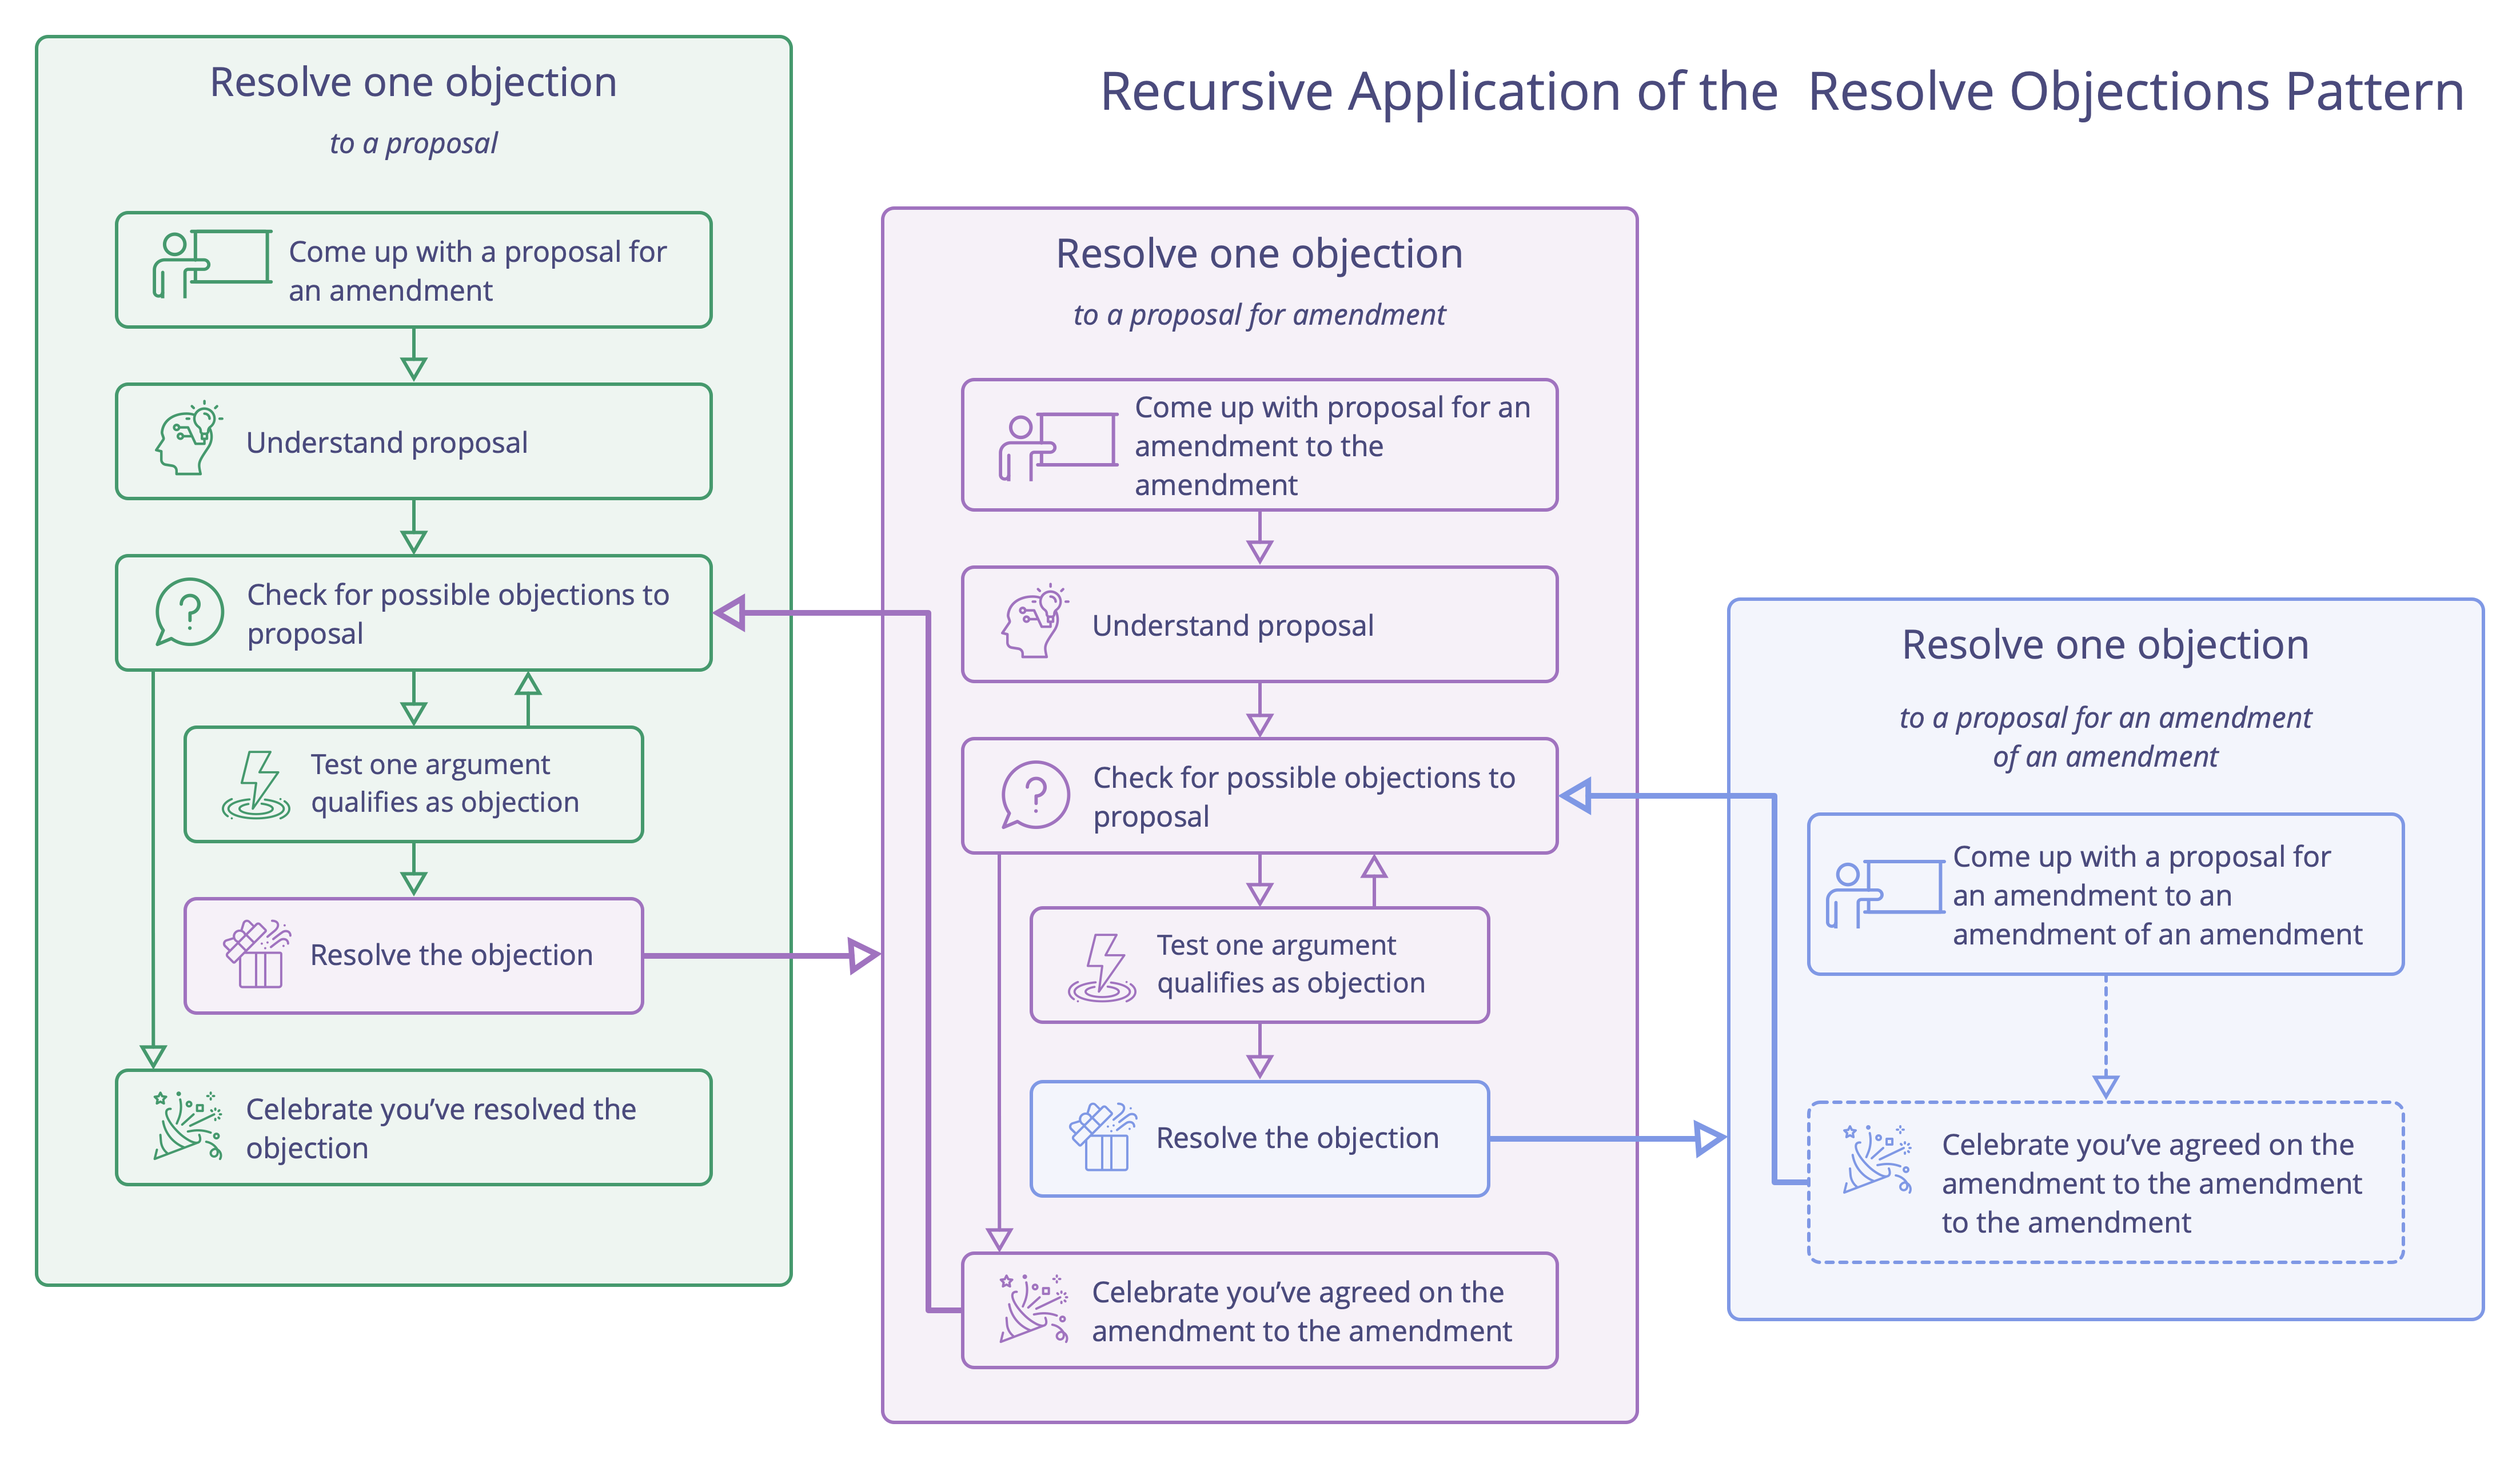 Recursive application of the Resolve Objection pattern